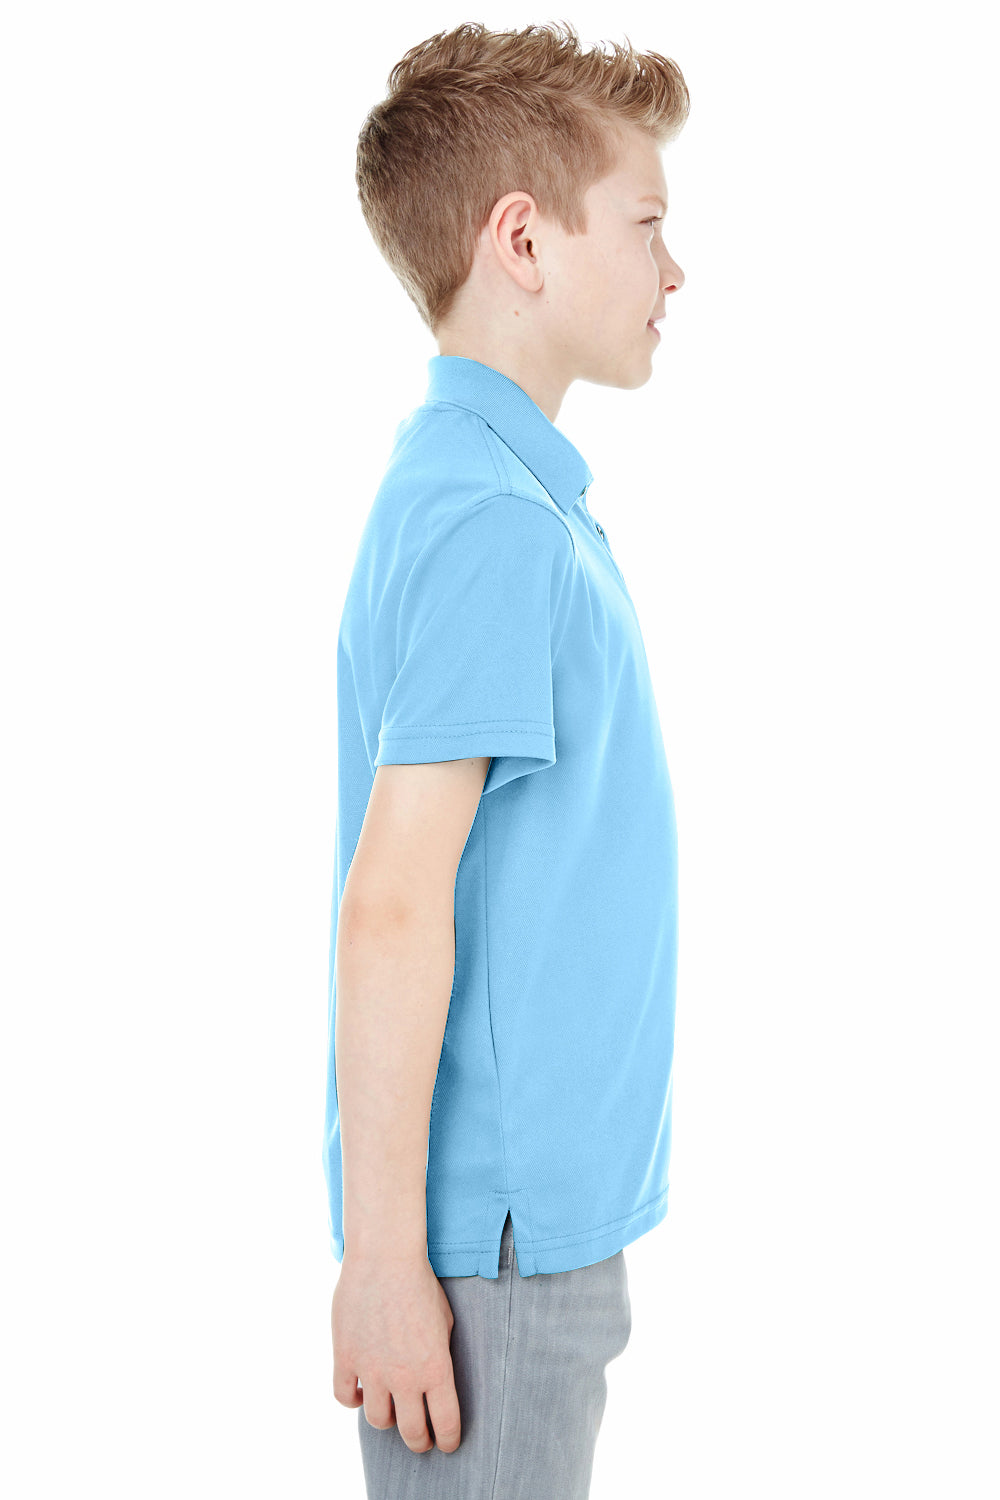 UltraClub 8210Y Youth Cool & Dry Moisture Wicking Short Sleeve Polo Shirt Columbia Blue Side